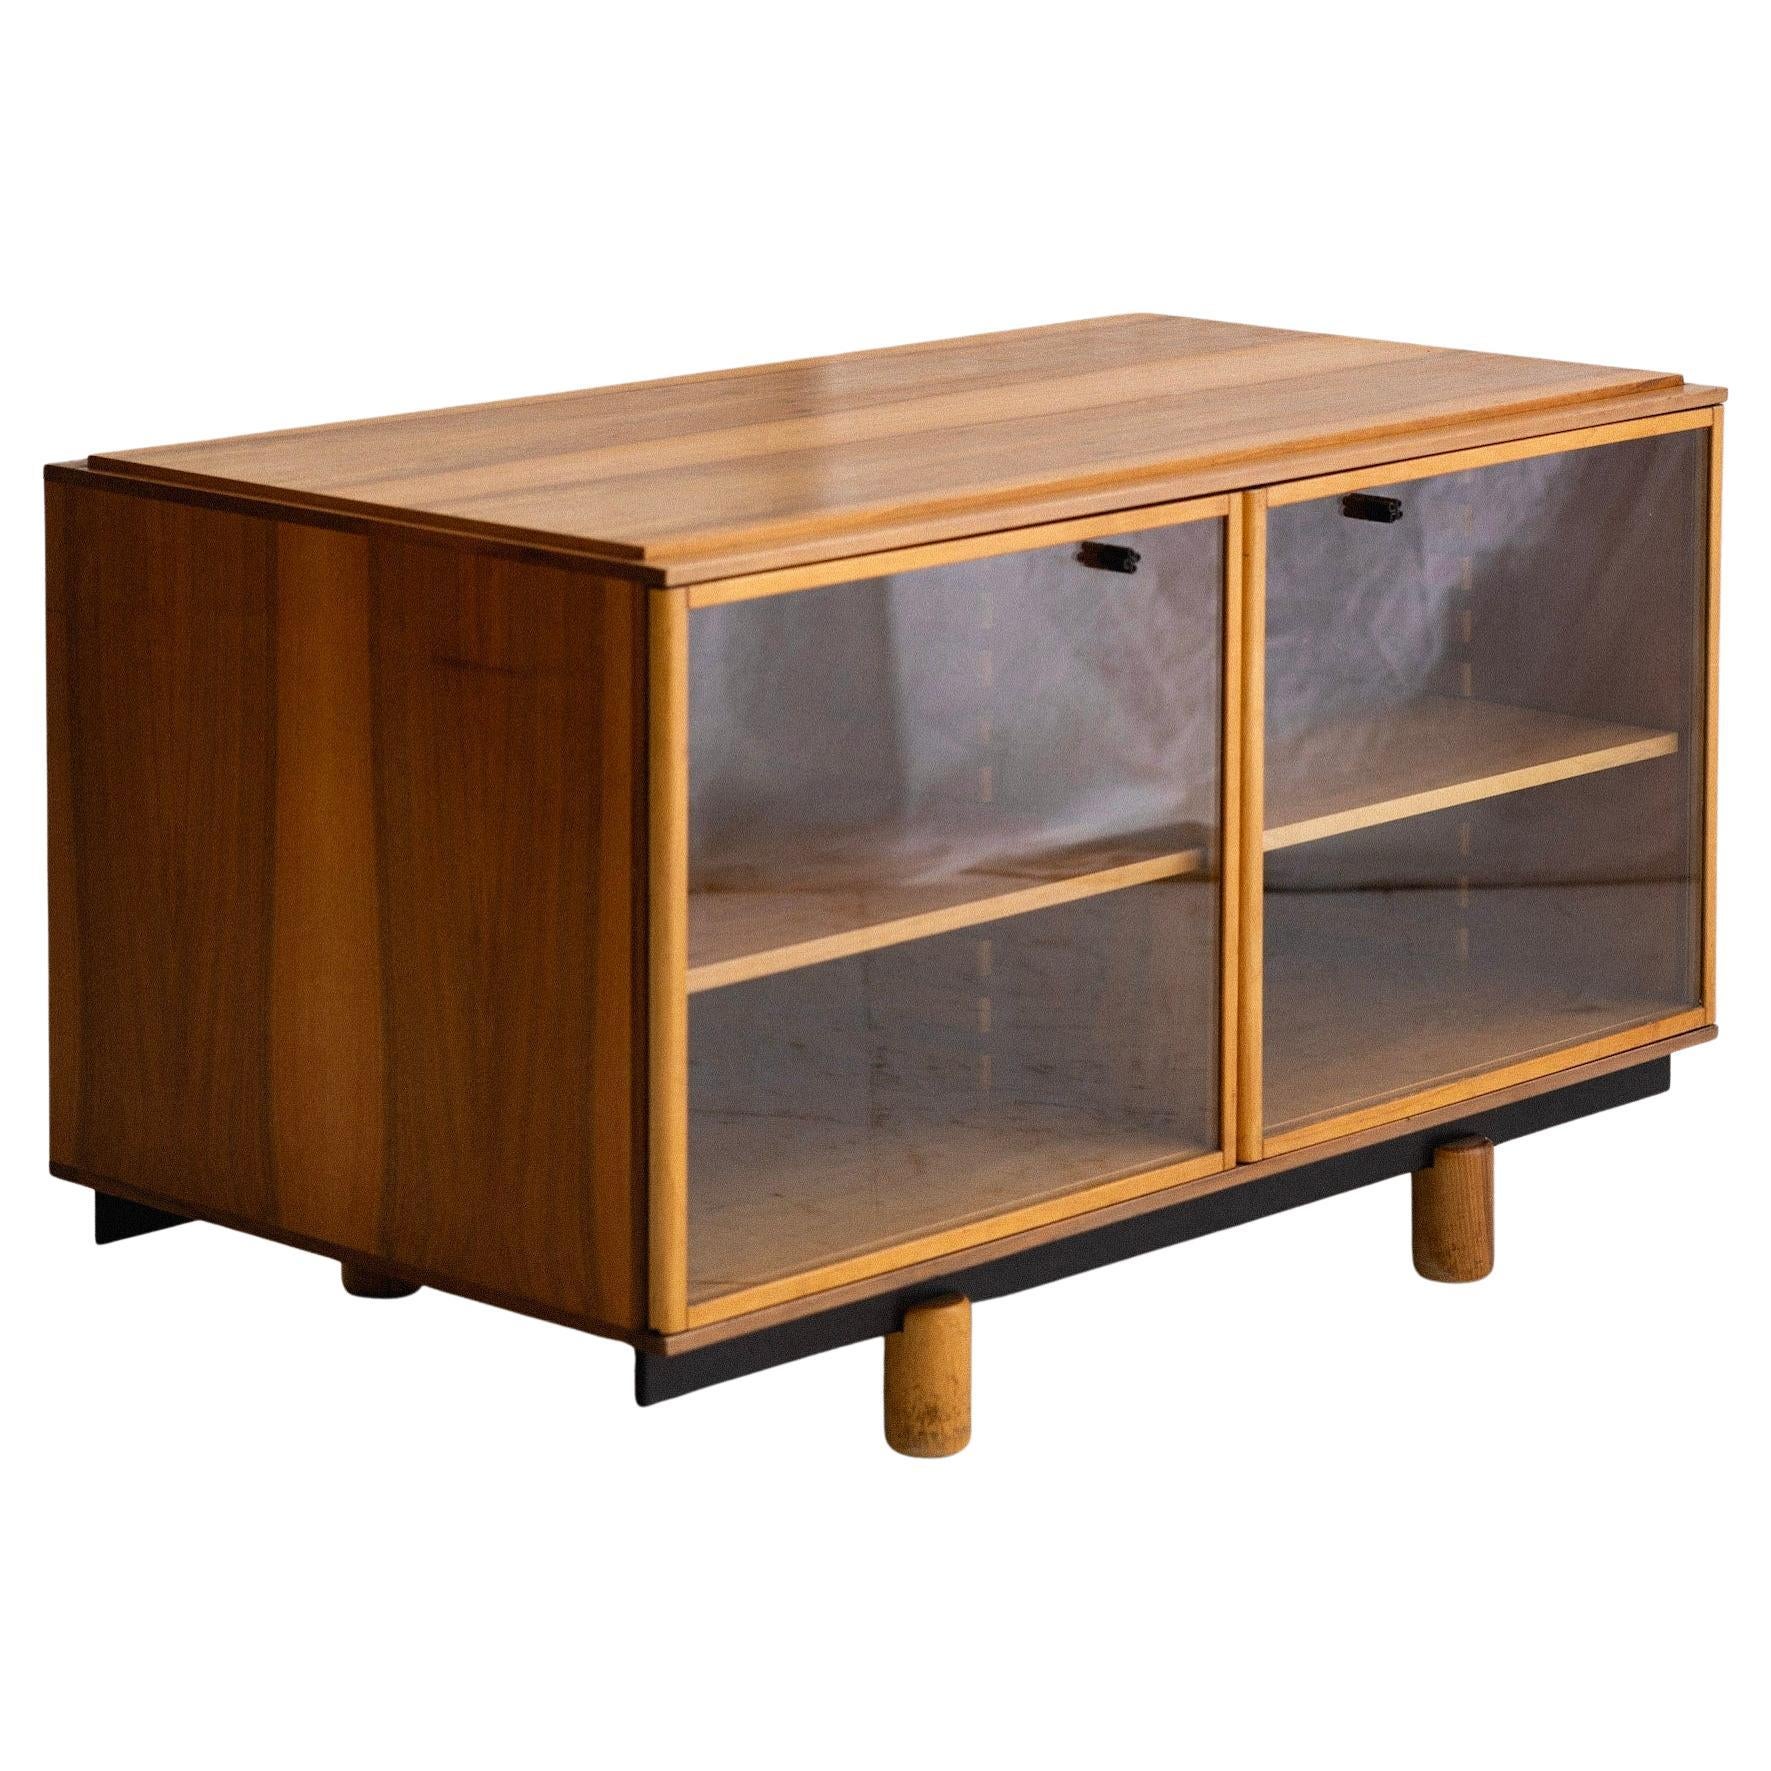 ‘Ovunque 806’ Modular Glass Door Sideboard by Gianfranco Frattini for Bernini For Sale